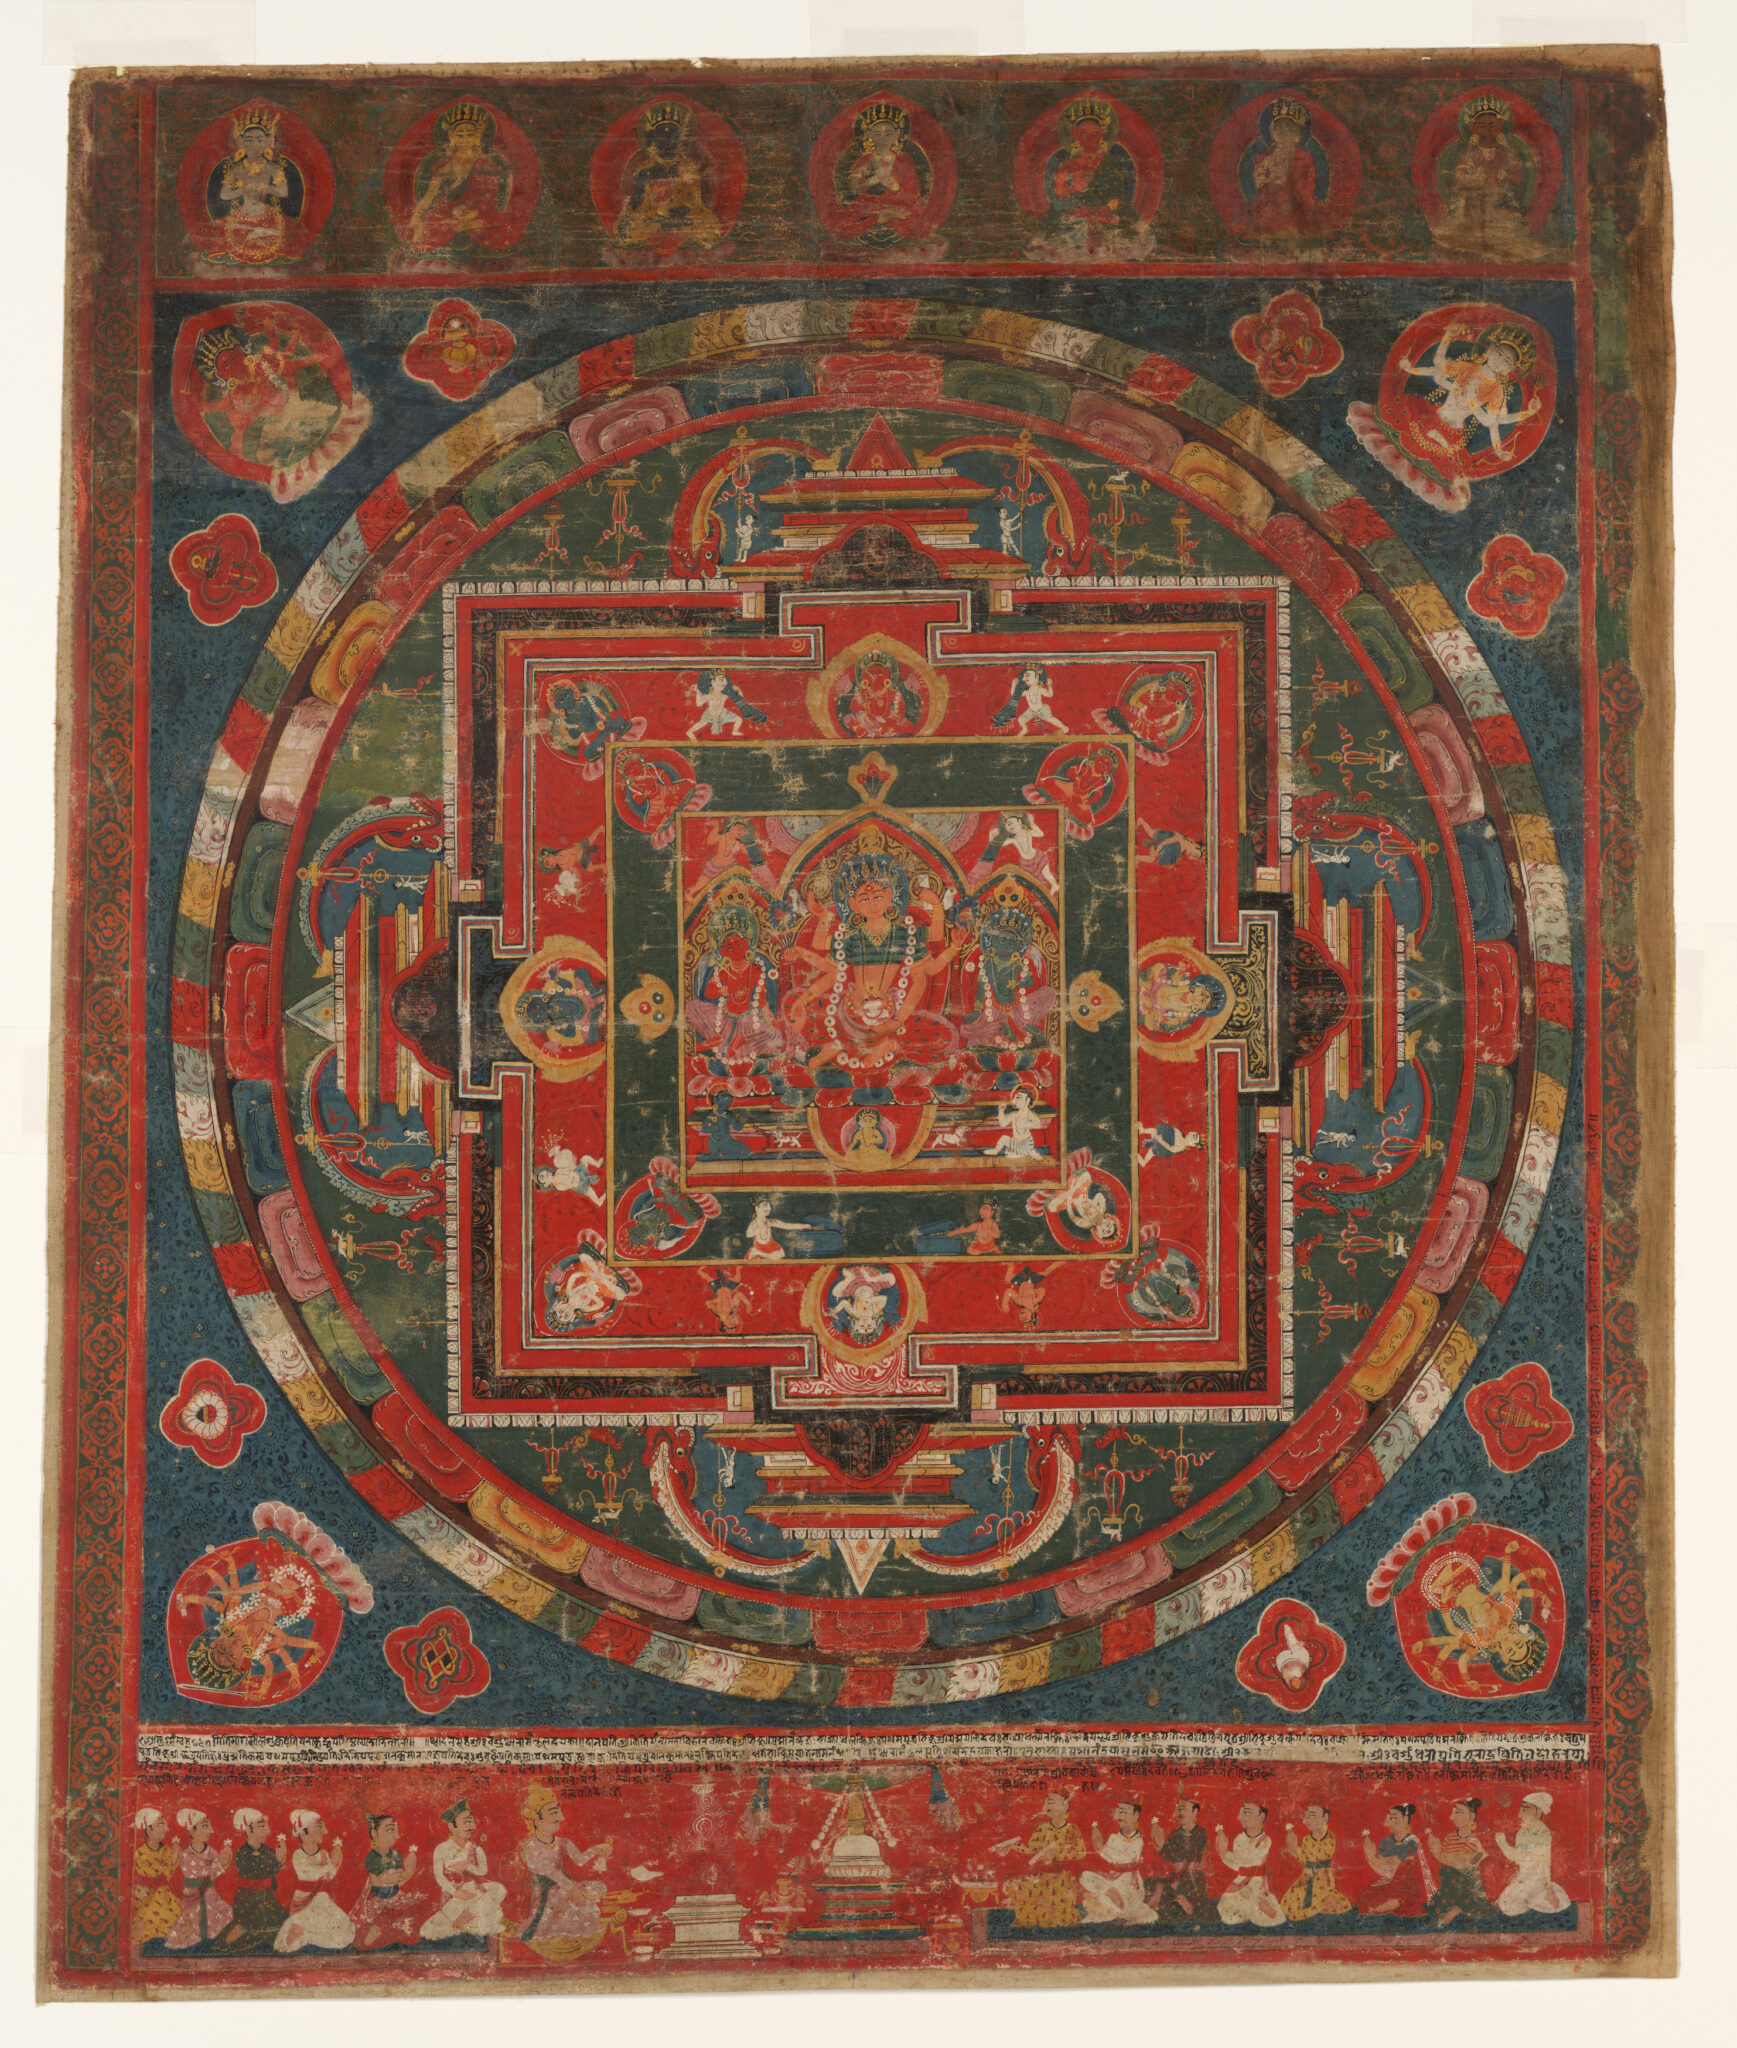 Sacred composition of concentric circles and squares featuring deity at center surrounded by multitude of figures and symbols